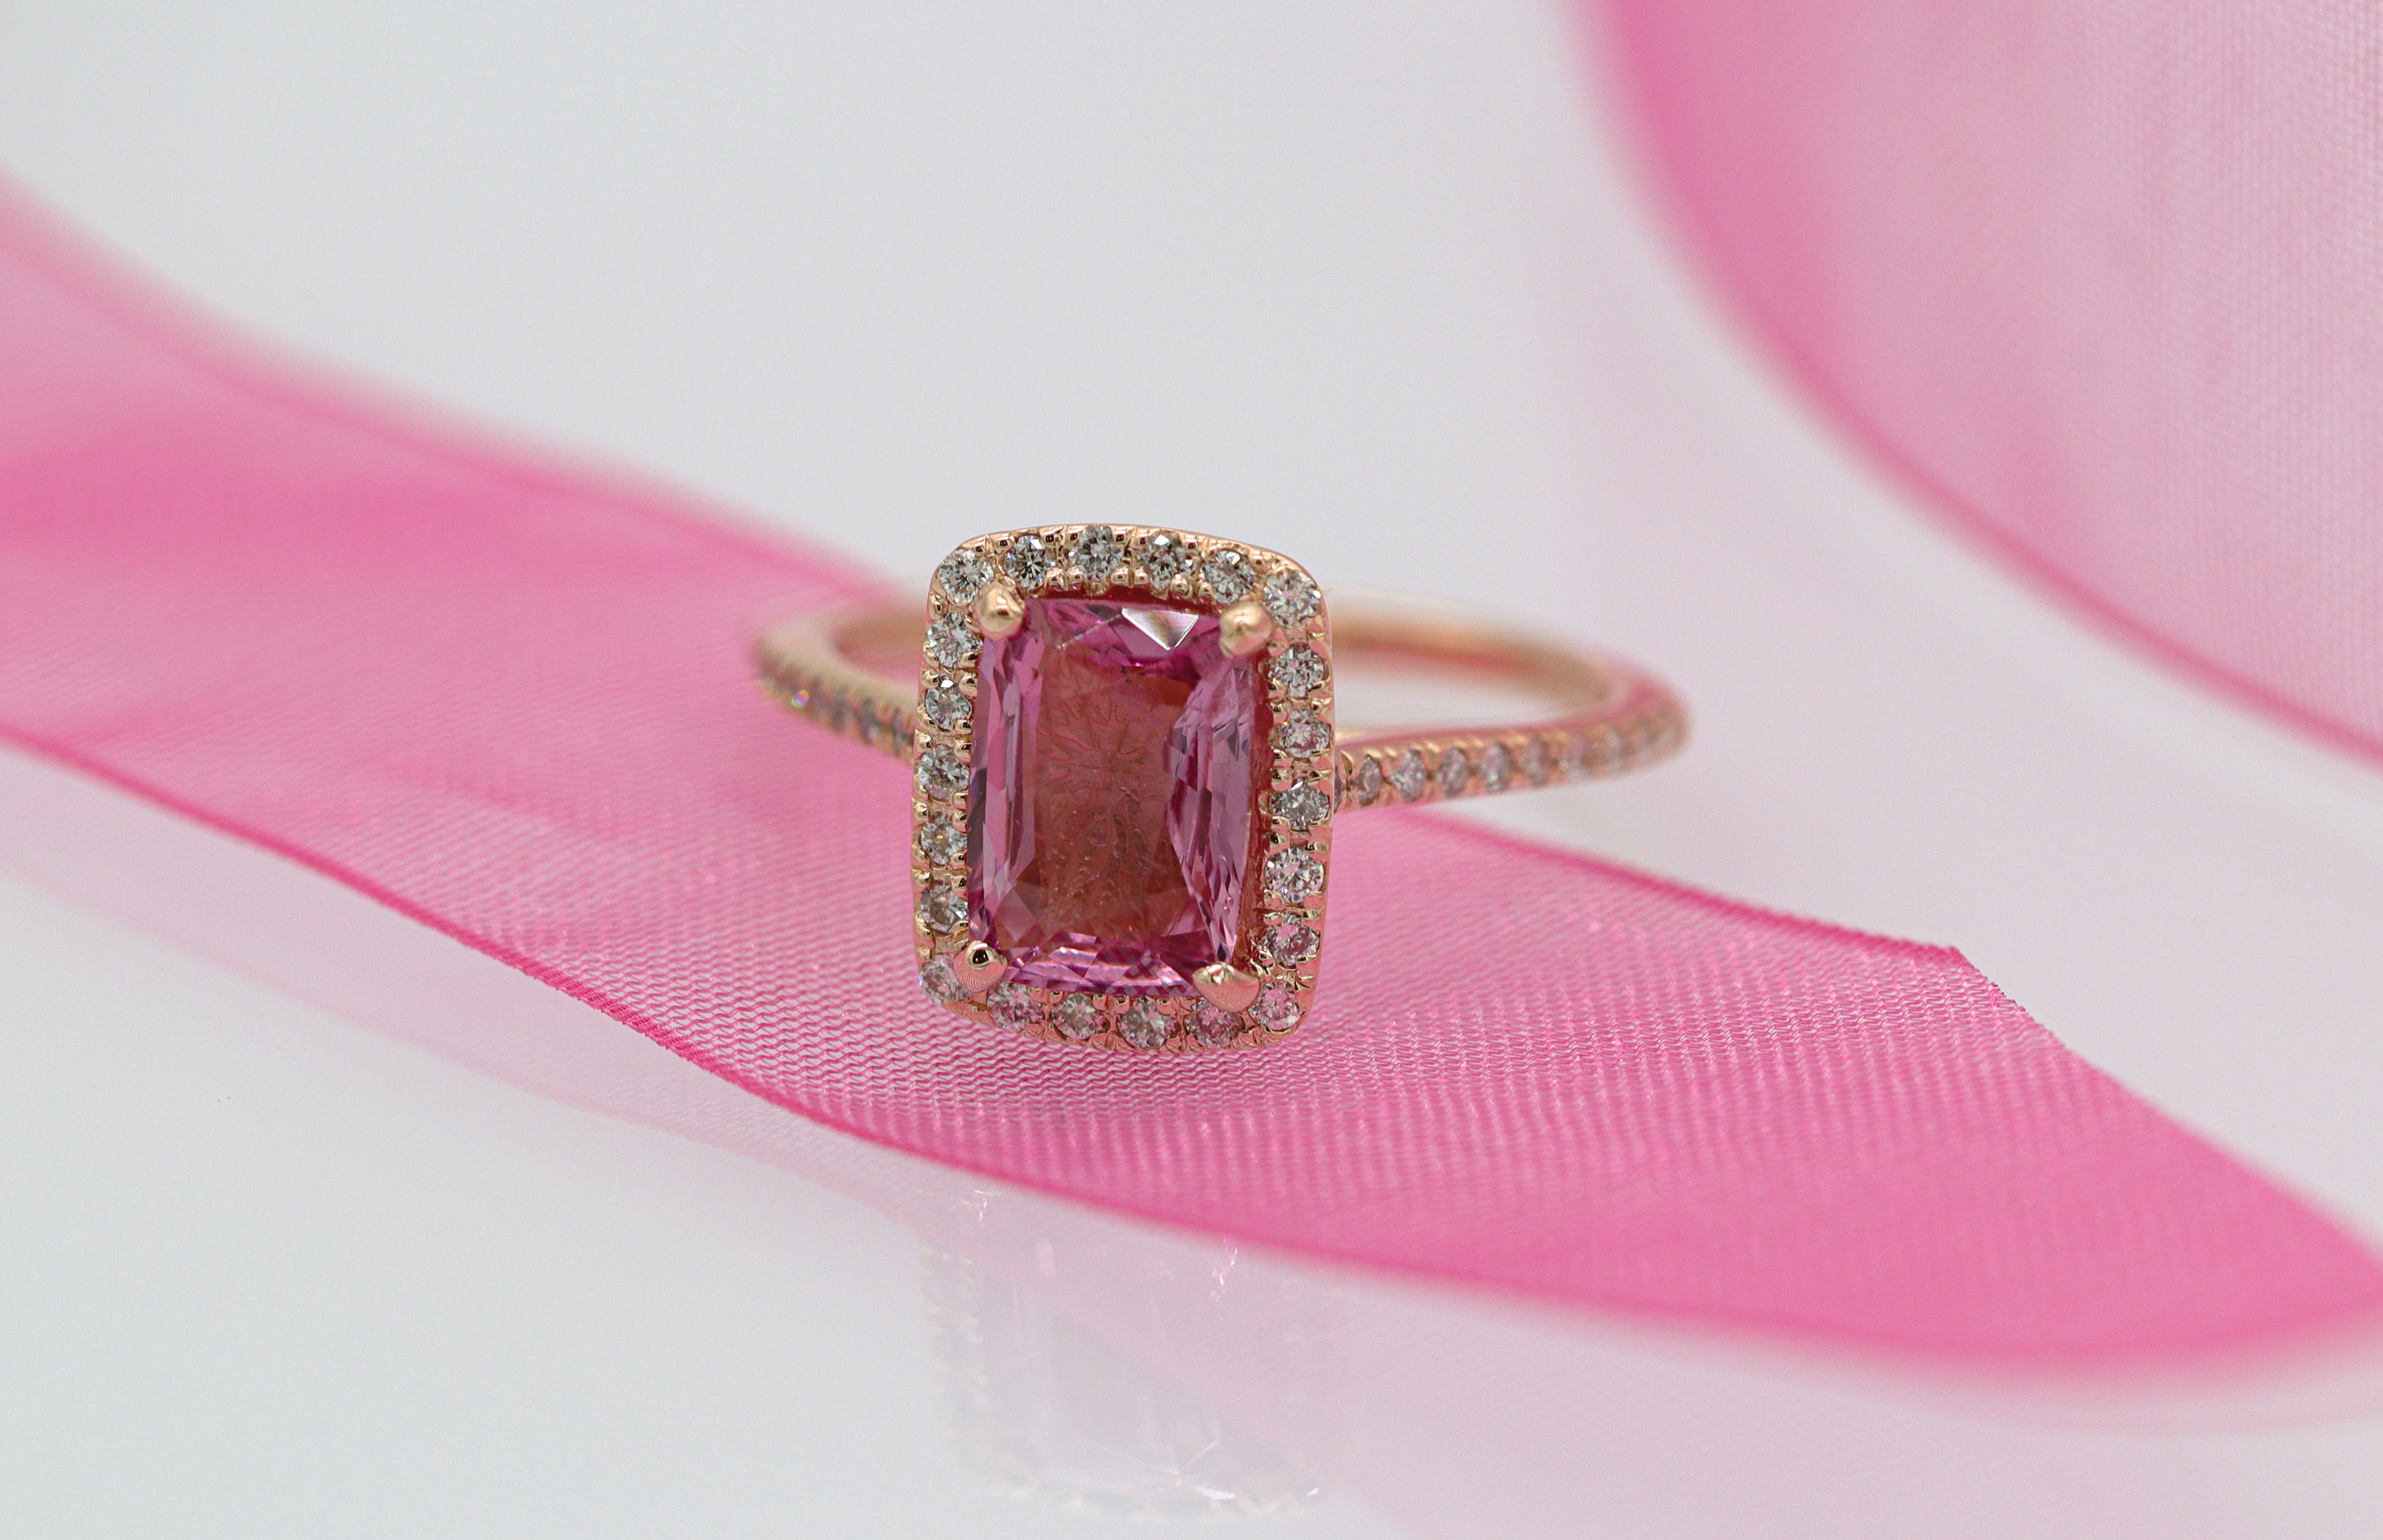 A ring with a pink rectangular, radiant cut stone.